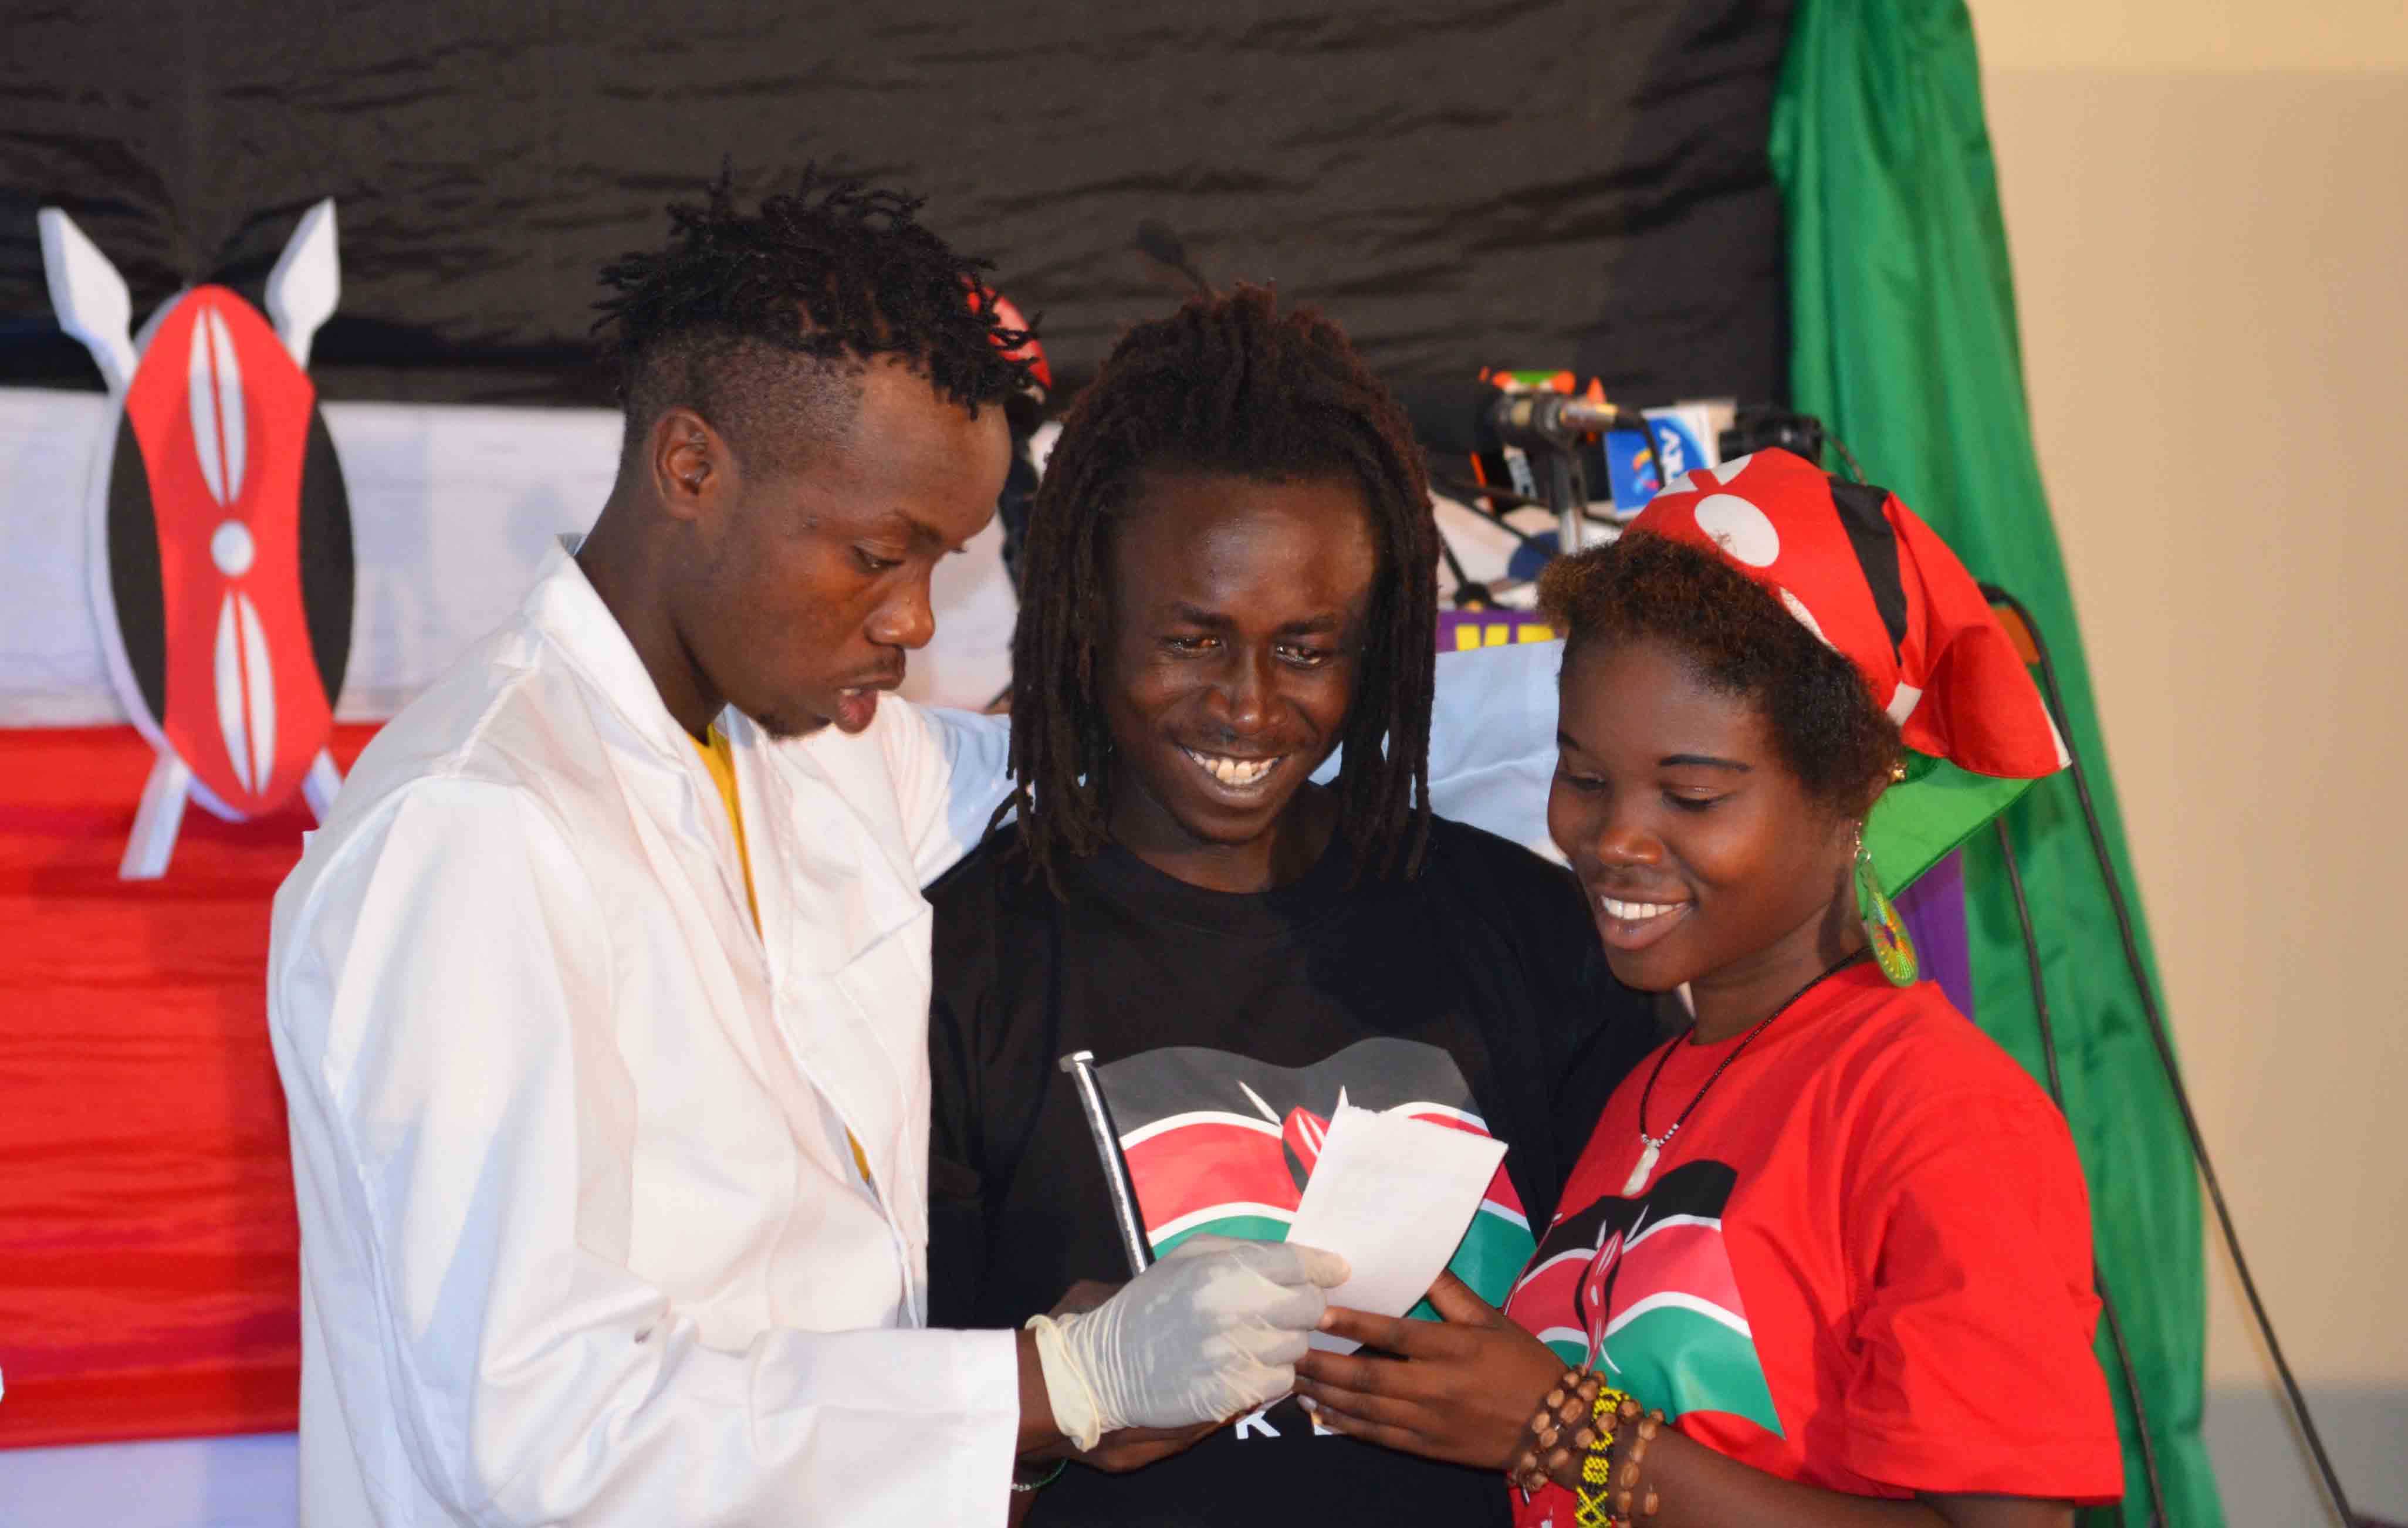 A youth group performs a skit in which a couple receive their HIV test results during the Kenya AIDS Indicator Survey. The 2012 survey was the first AIDS Indicator Survey to offer home-based counseling and testing, giving participants immediate access to their HIV test results.